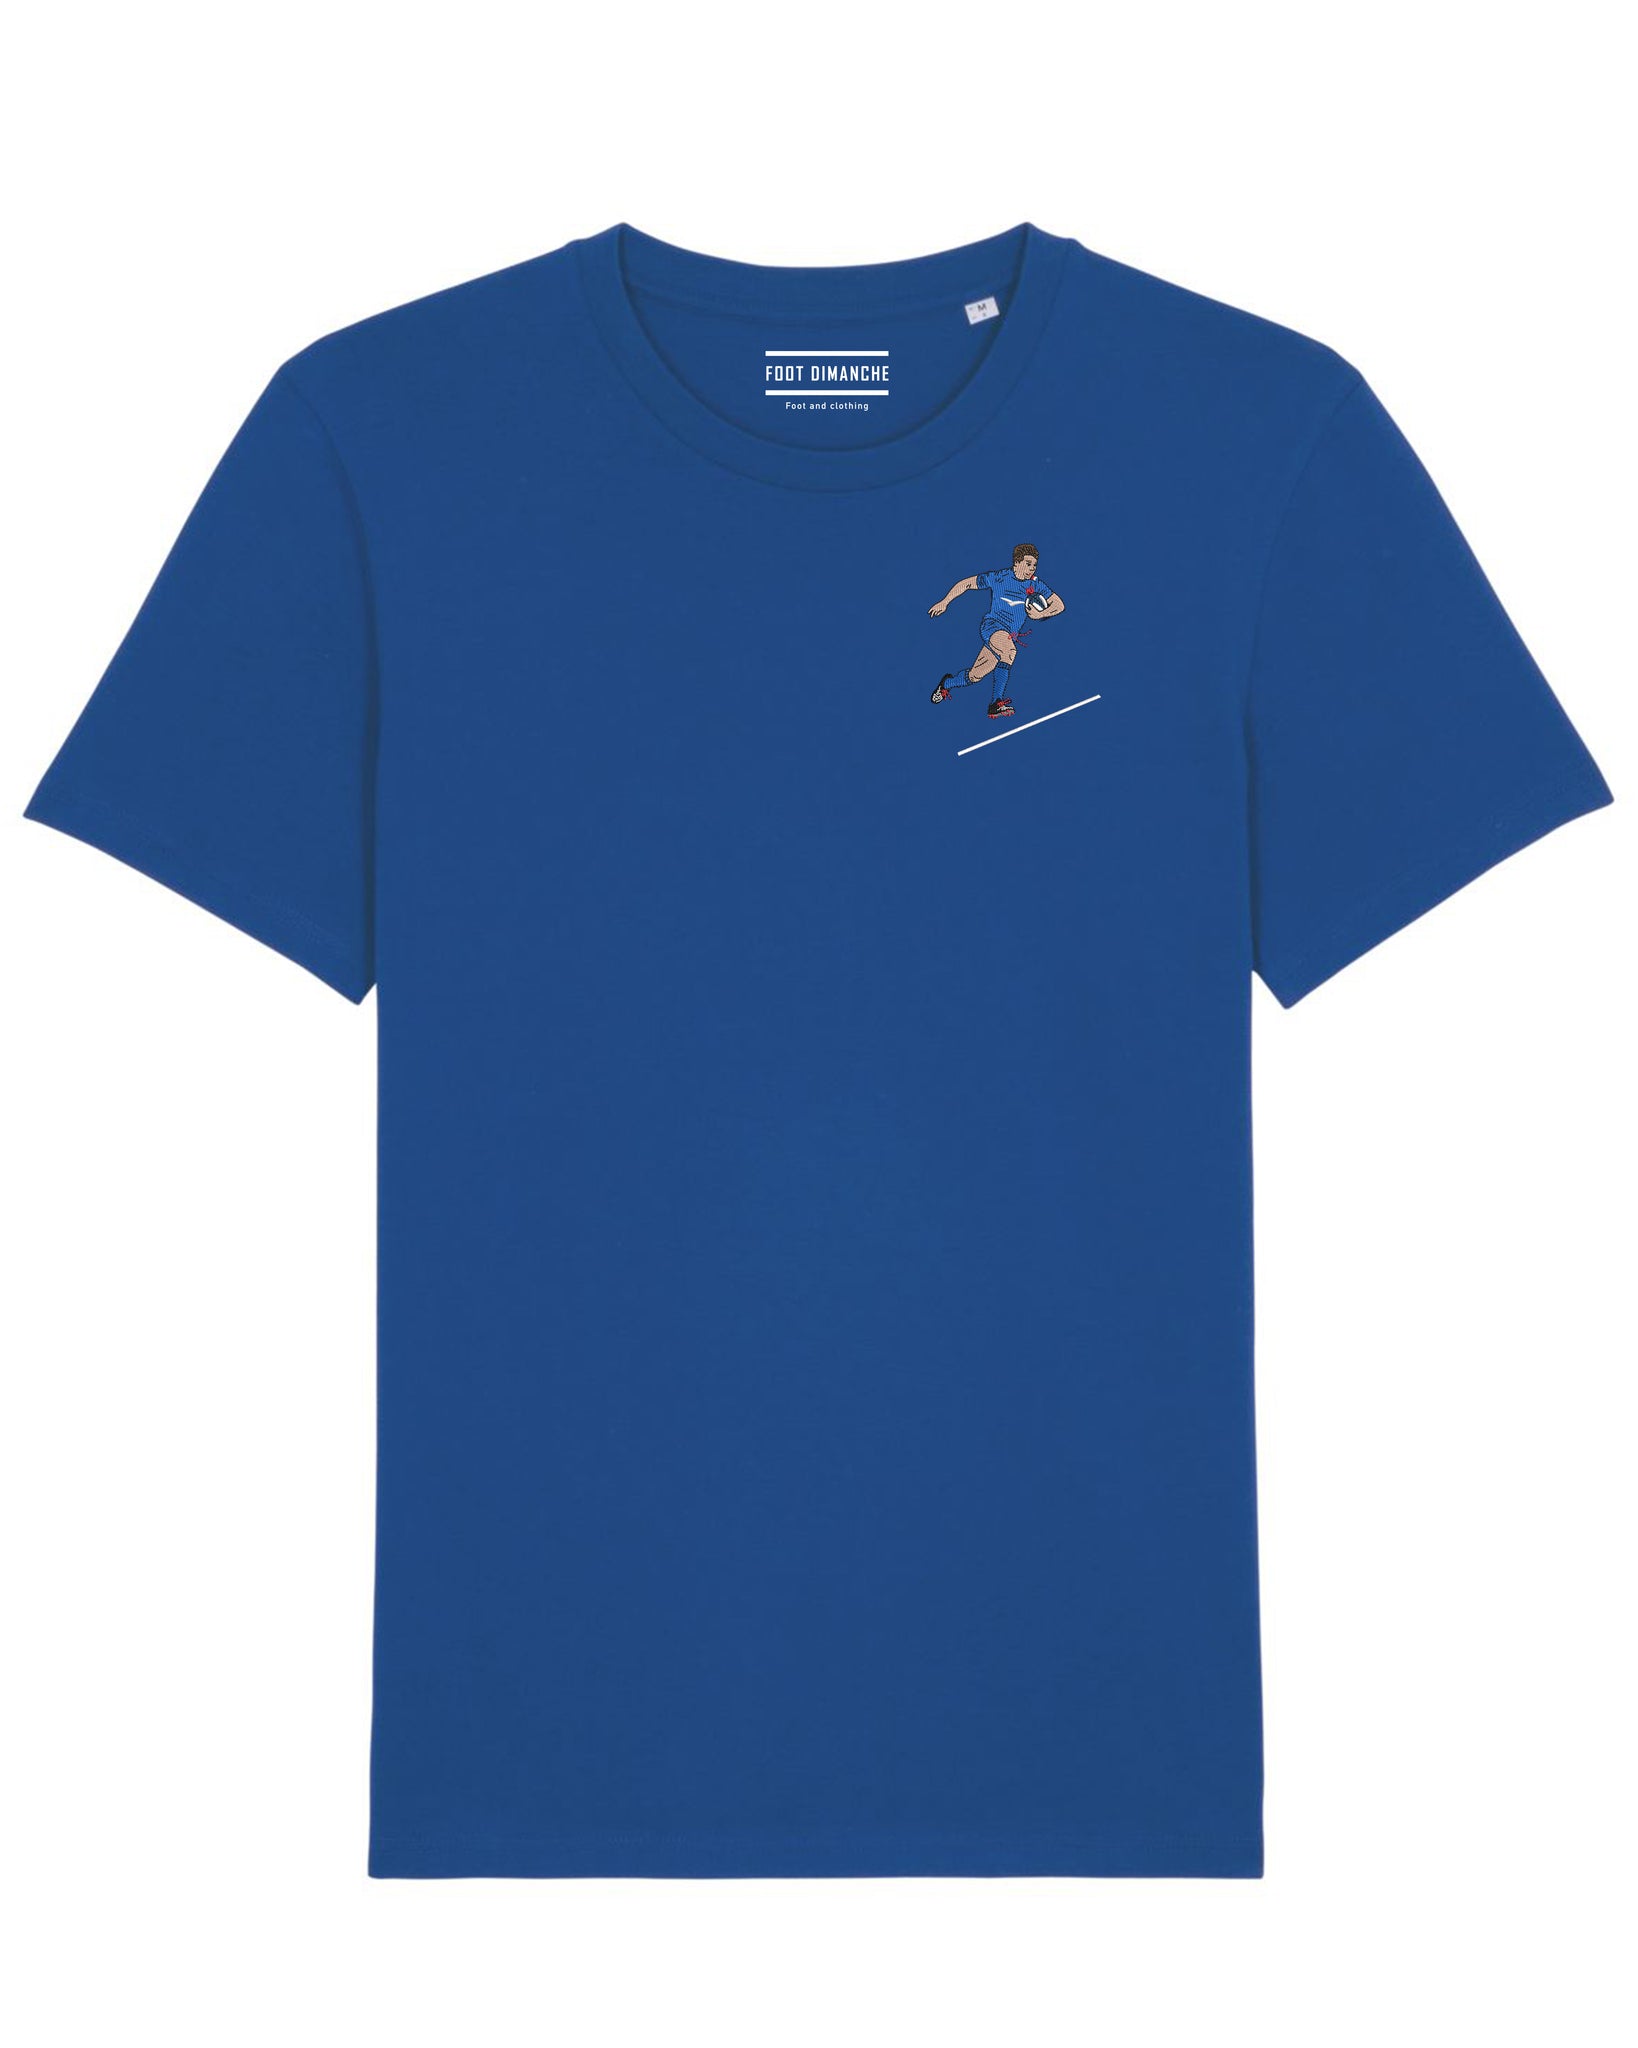 Embroidered French Flair Tee Shirt